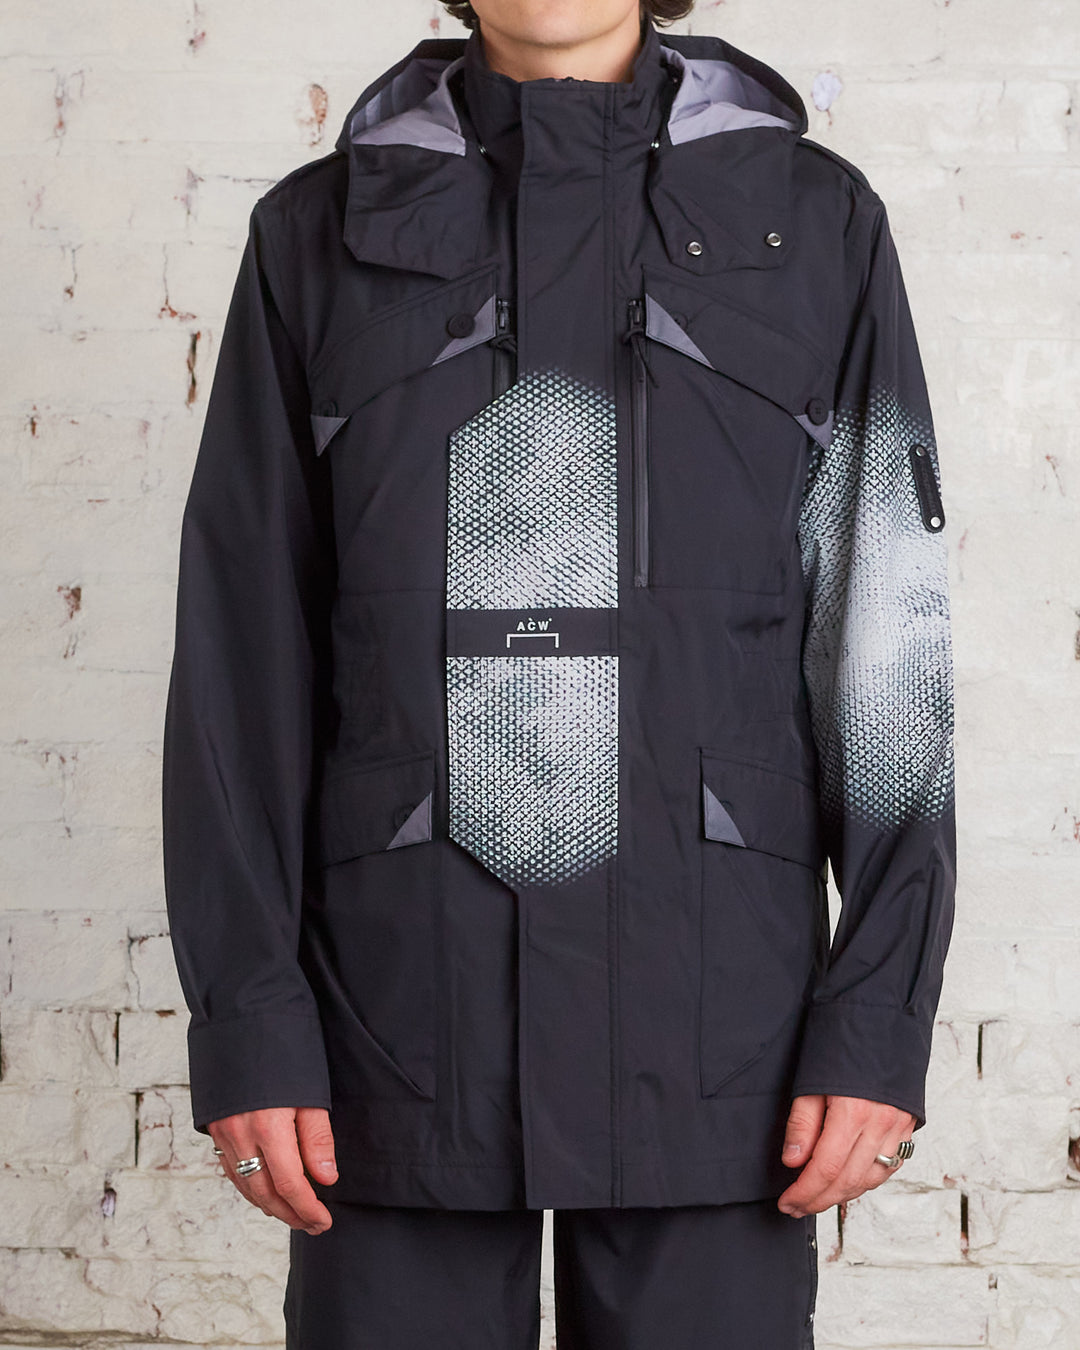 A-COLD-WALL* Graphic M-65 Model 6 Jacket Black